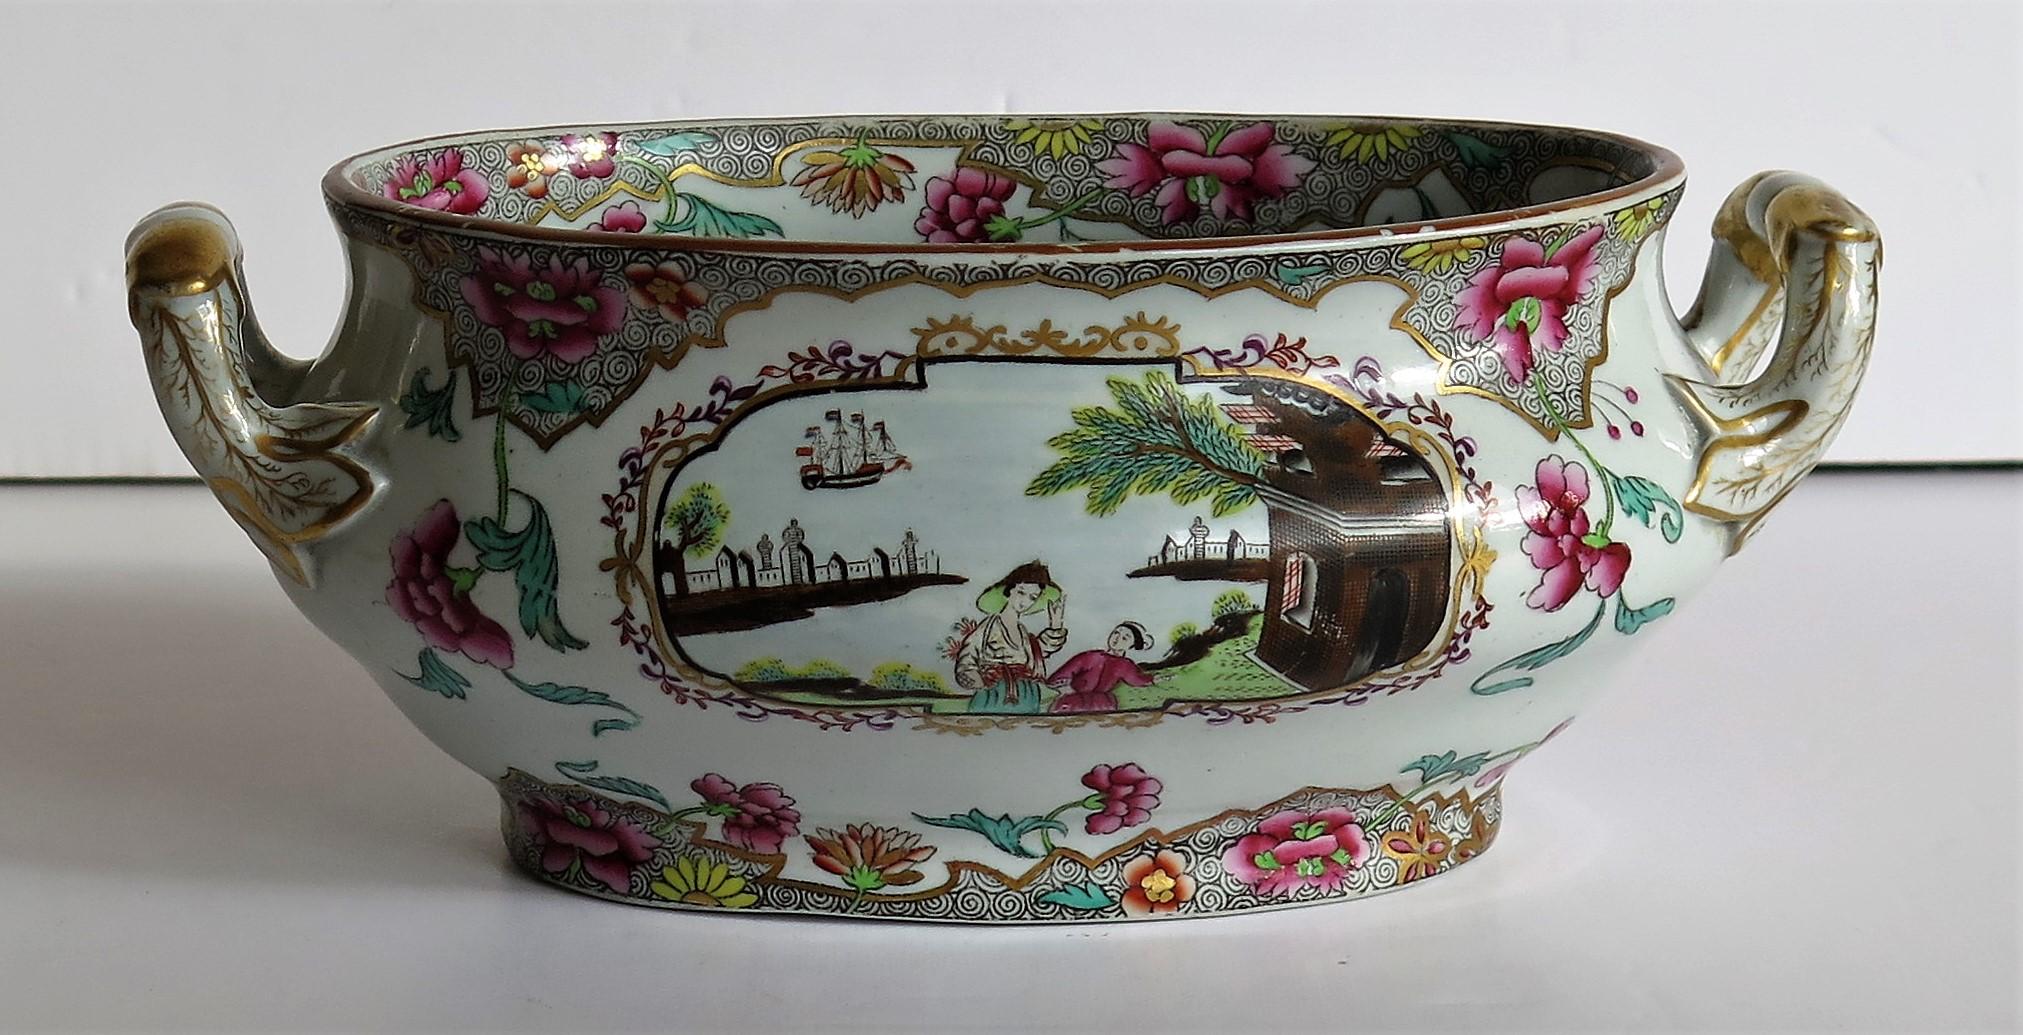 Spode Stone China Sauce Tureen & Stand in Ship Pattern 3067, circa 1810 3